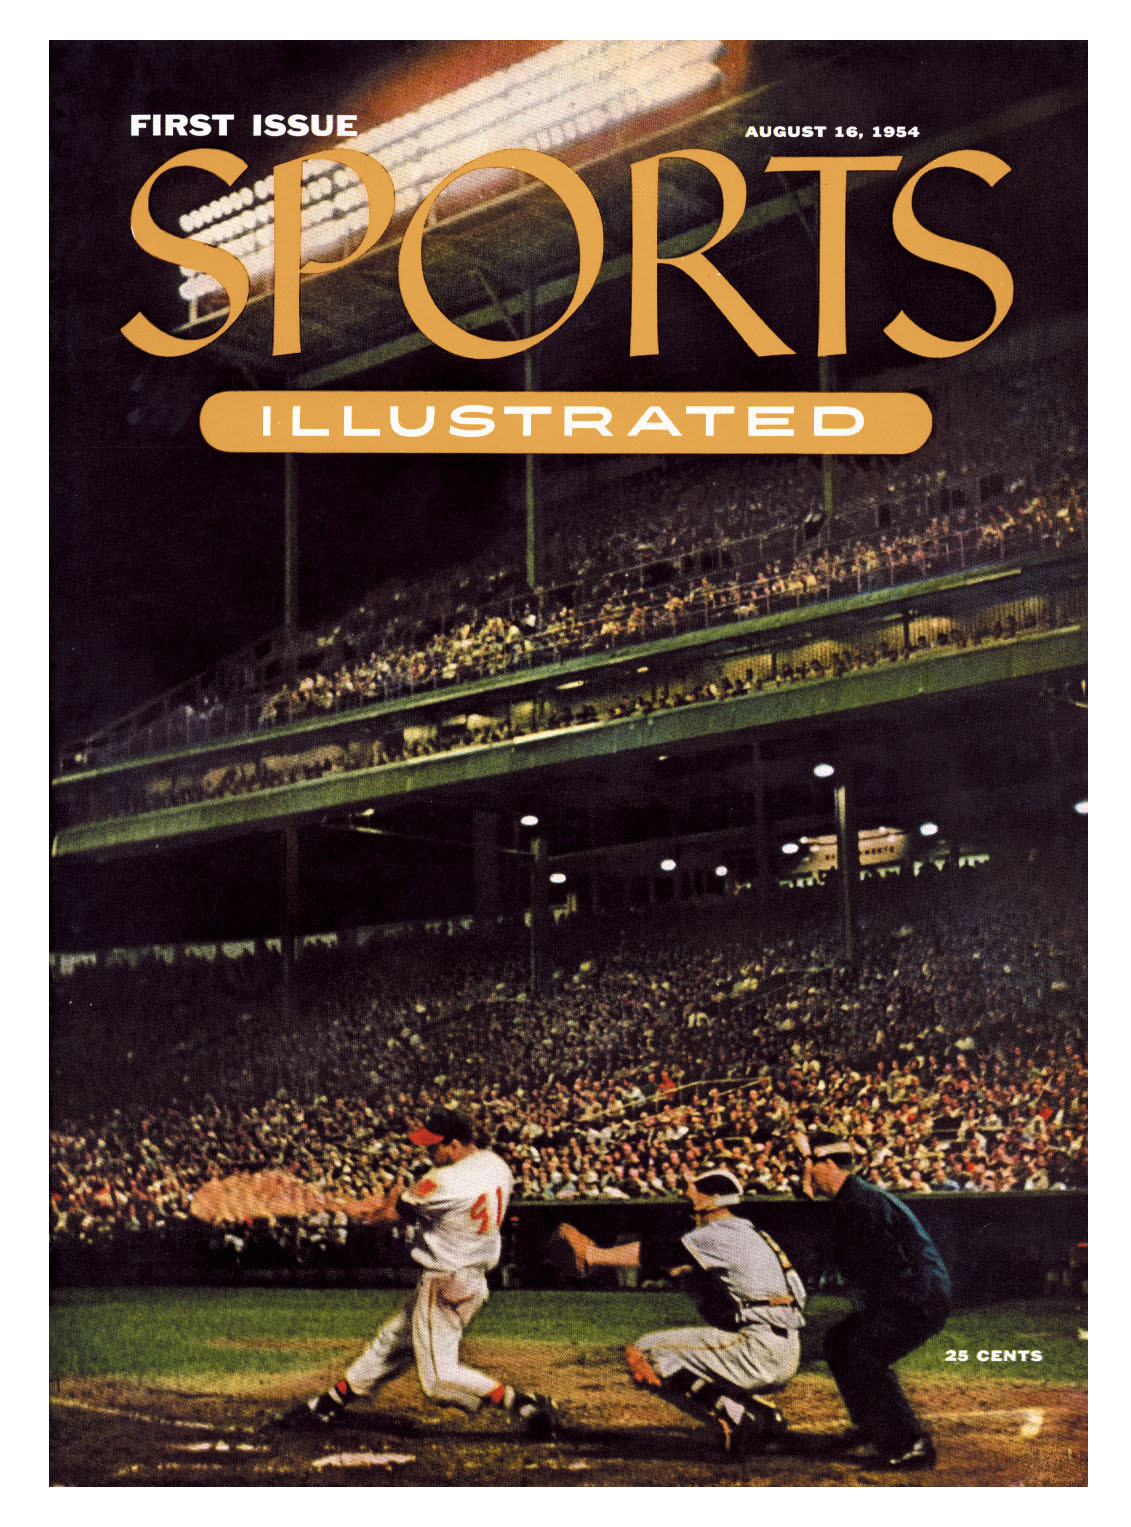 BACK IN THE DAY |8/16/54| Sports Illustrated published their first issue. Read it